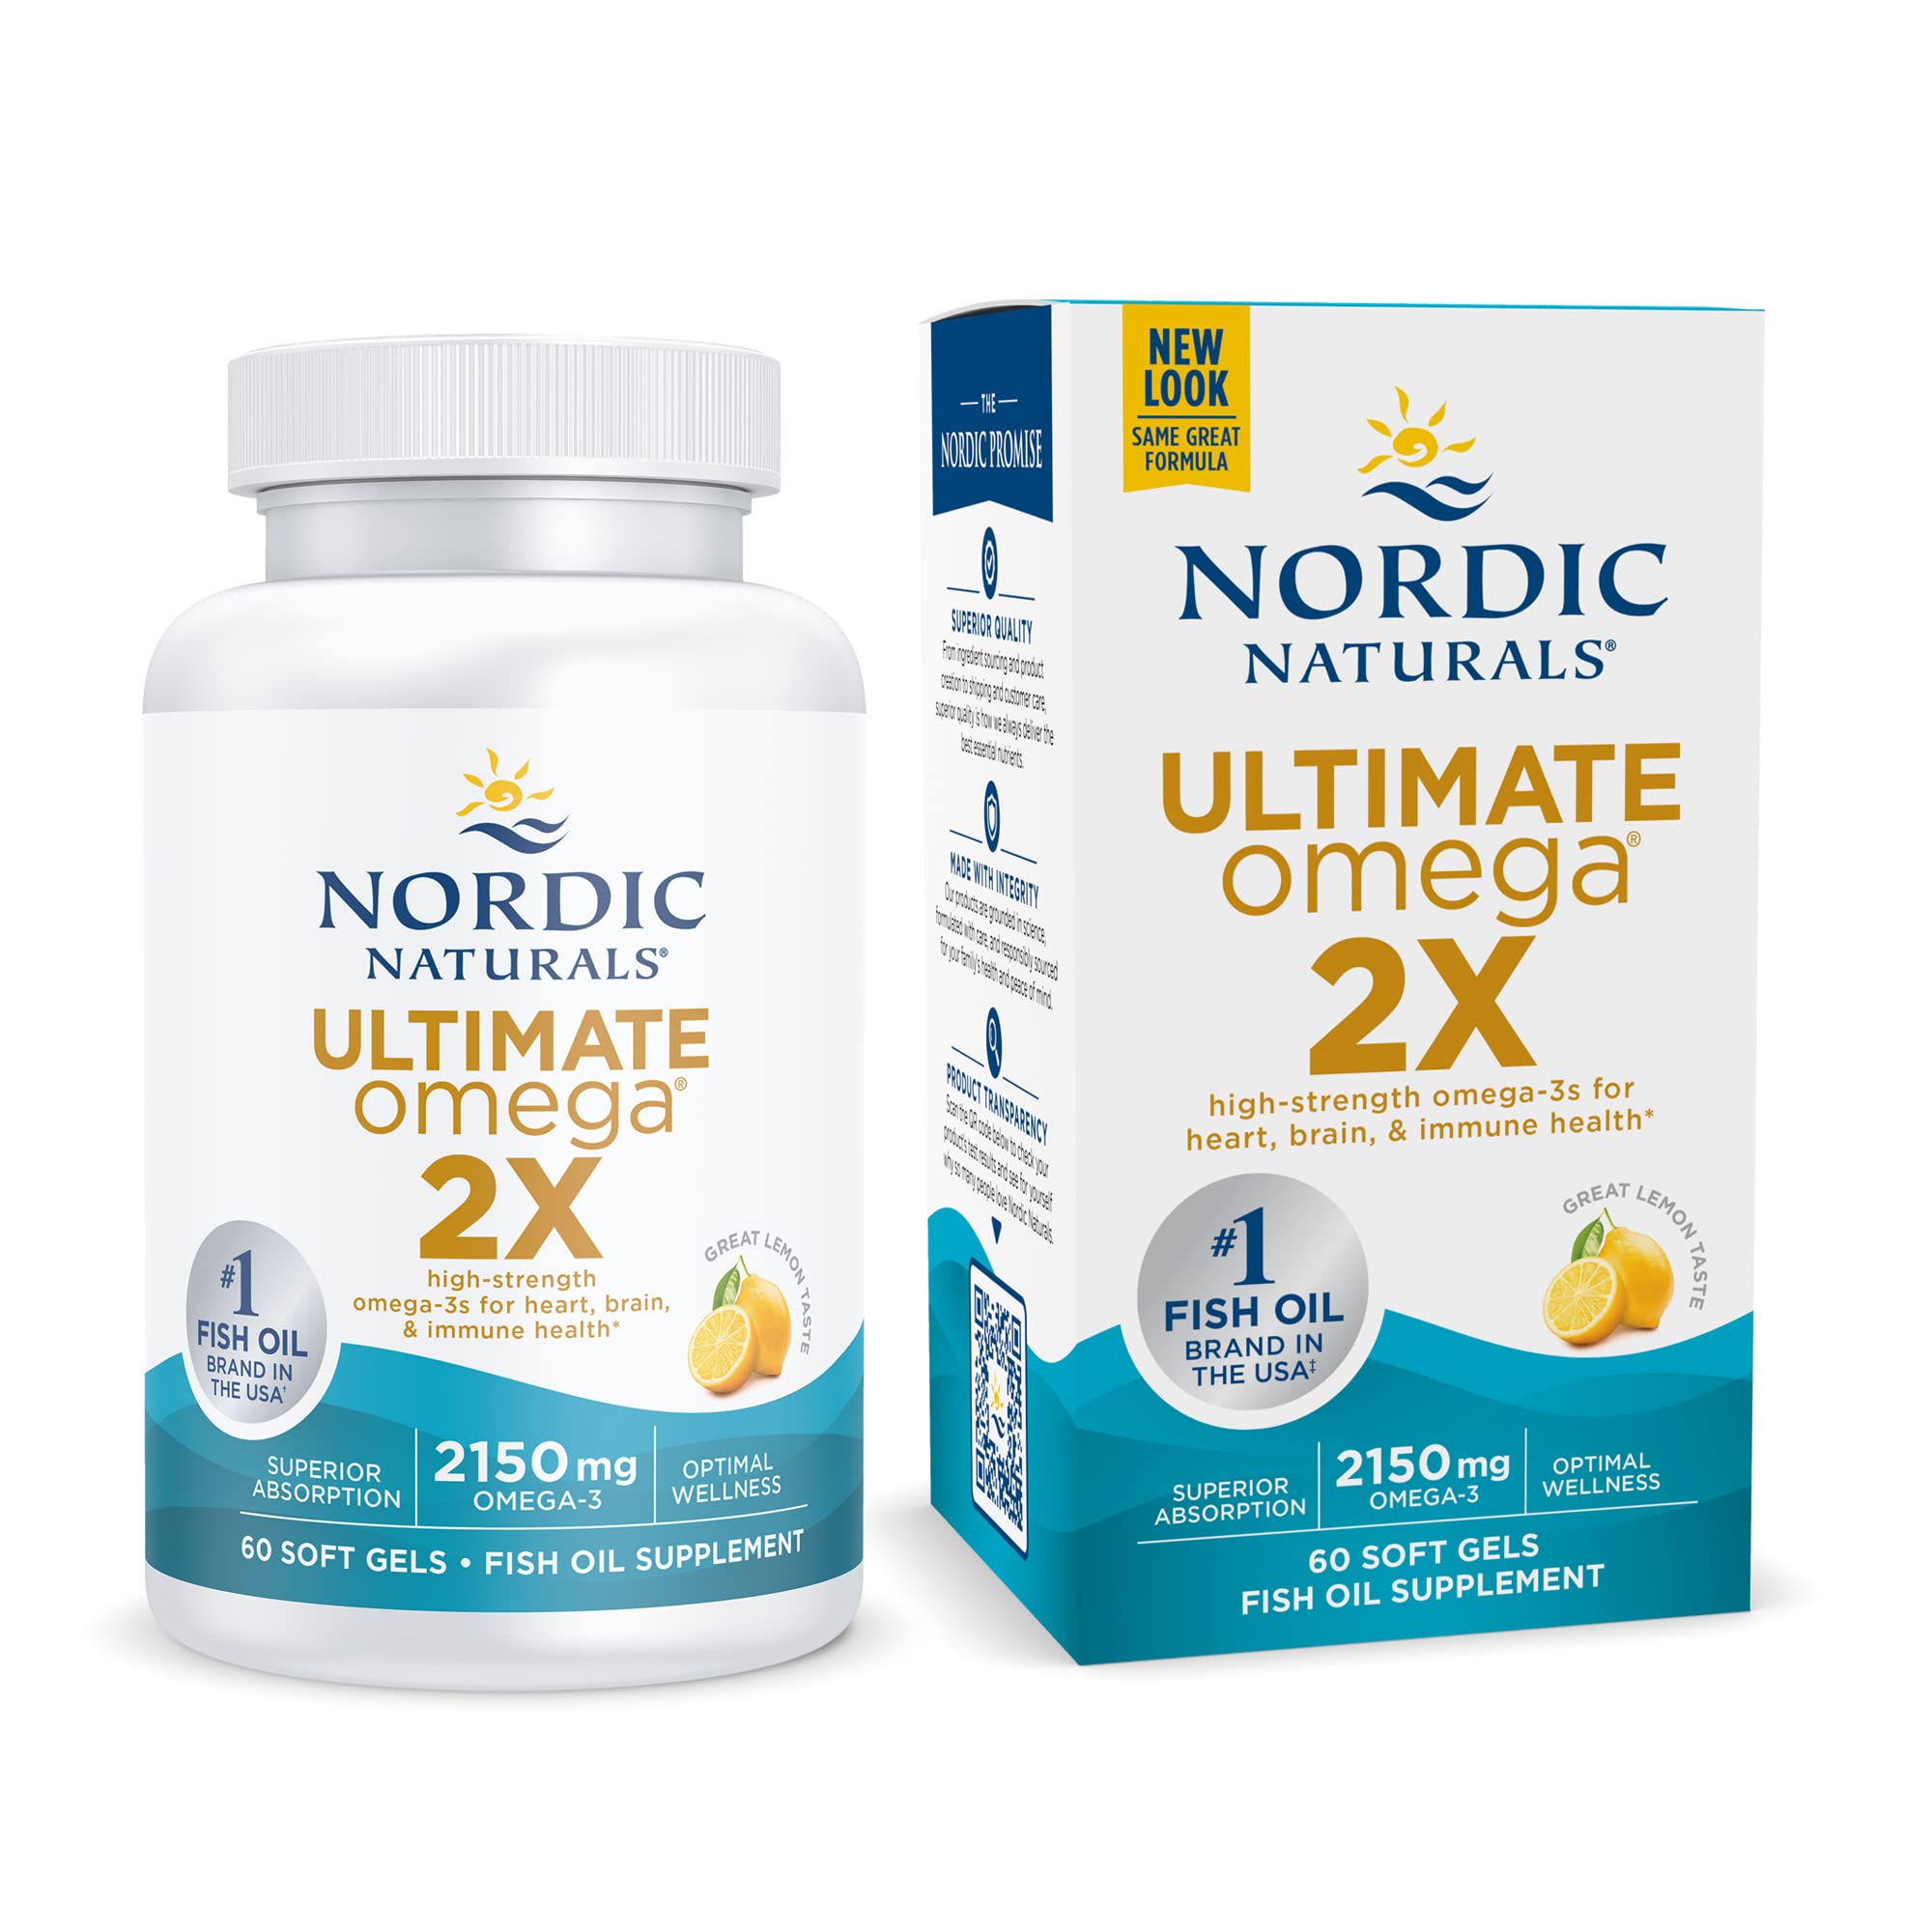 Nordic Naturals Ultimate Omega 2X, Lemon Flavor - 2150 mg Omega-3-60 Soft Gels - High-Potency Omega-3 Fish Oil with EPA & DHA - Promotes Brain & Heart Health - Non-GMO - 30 Servings